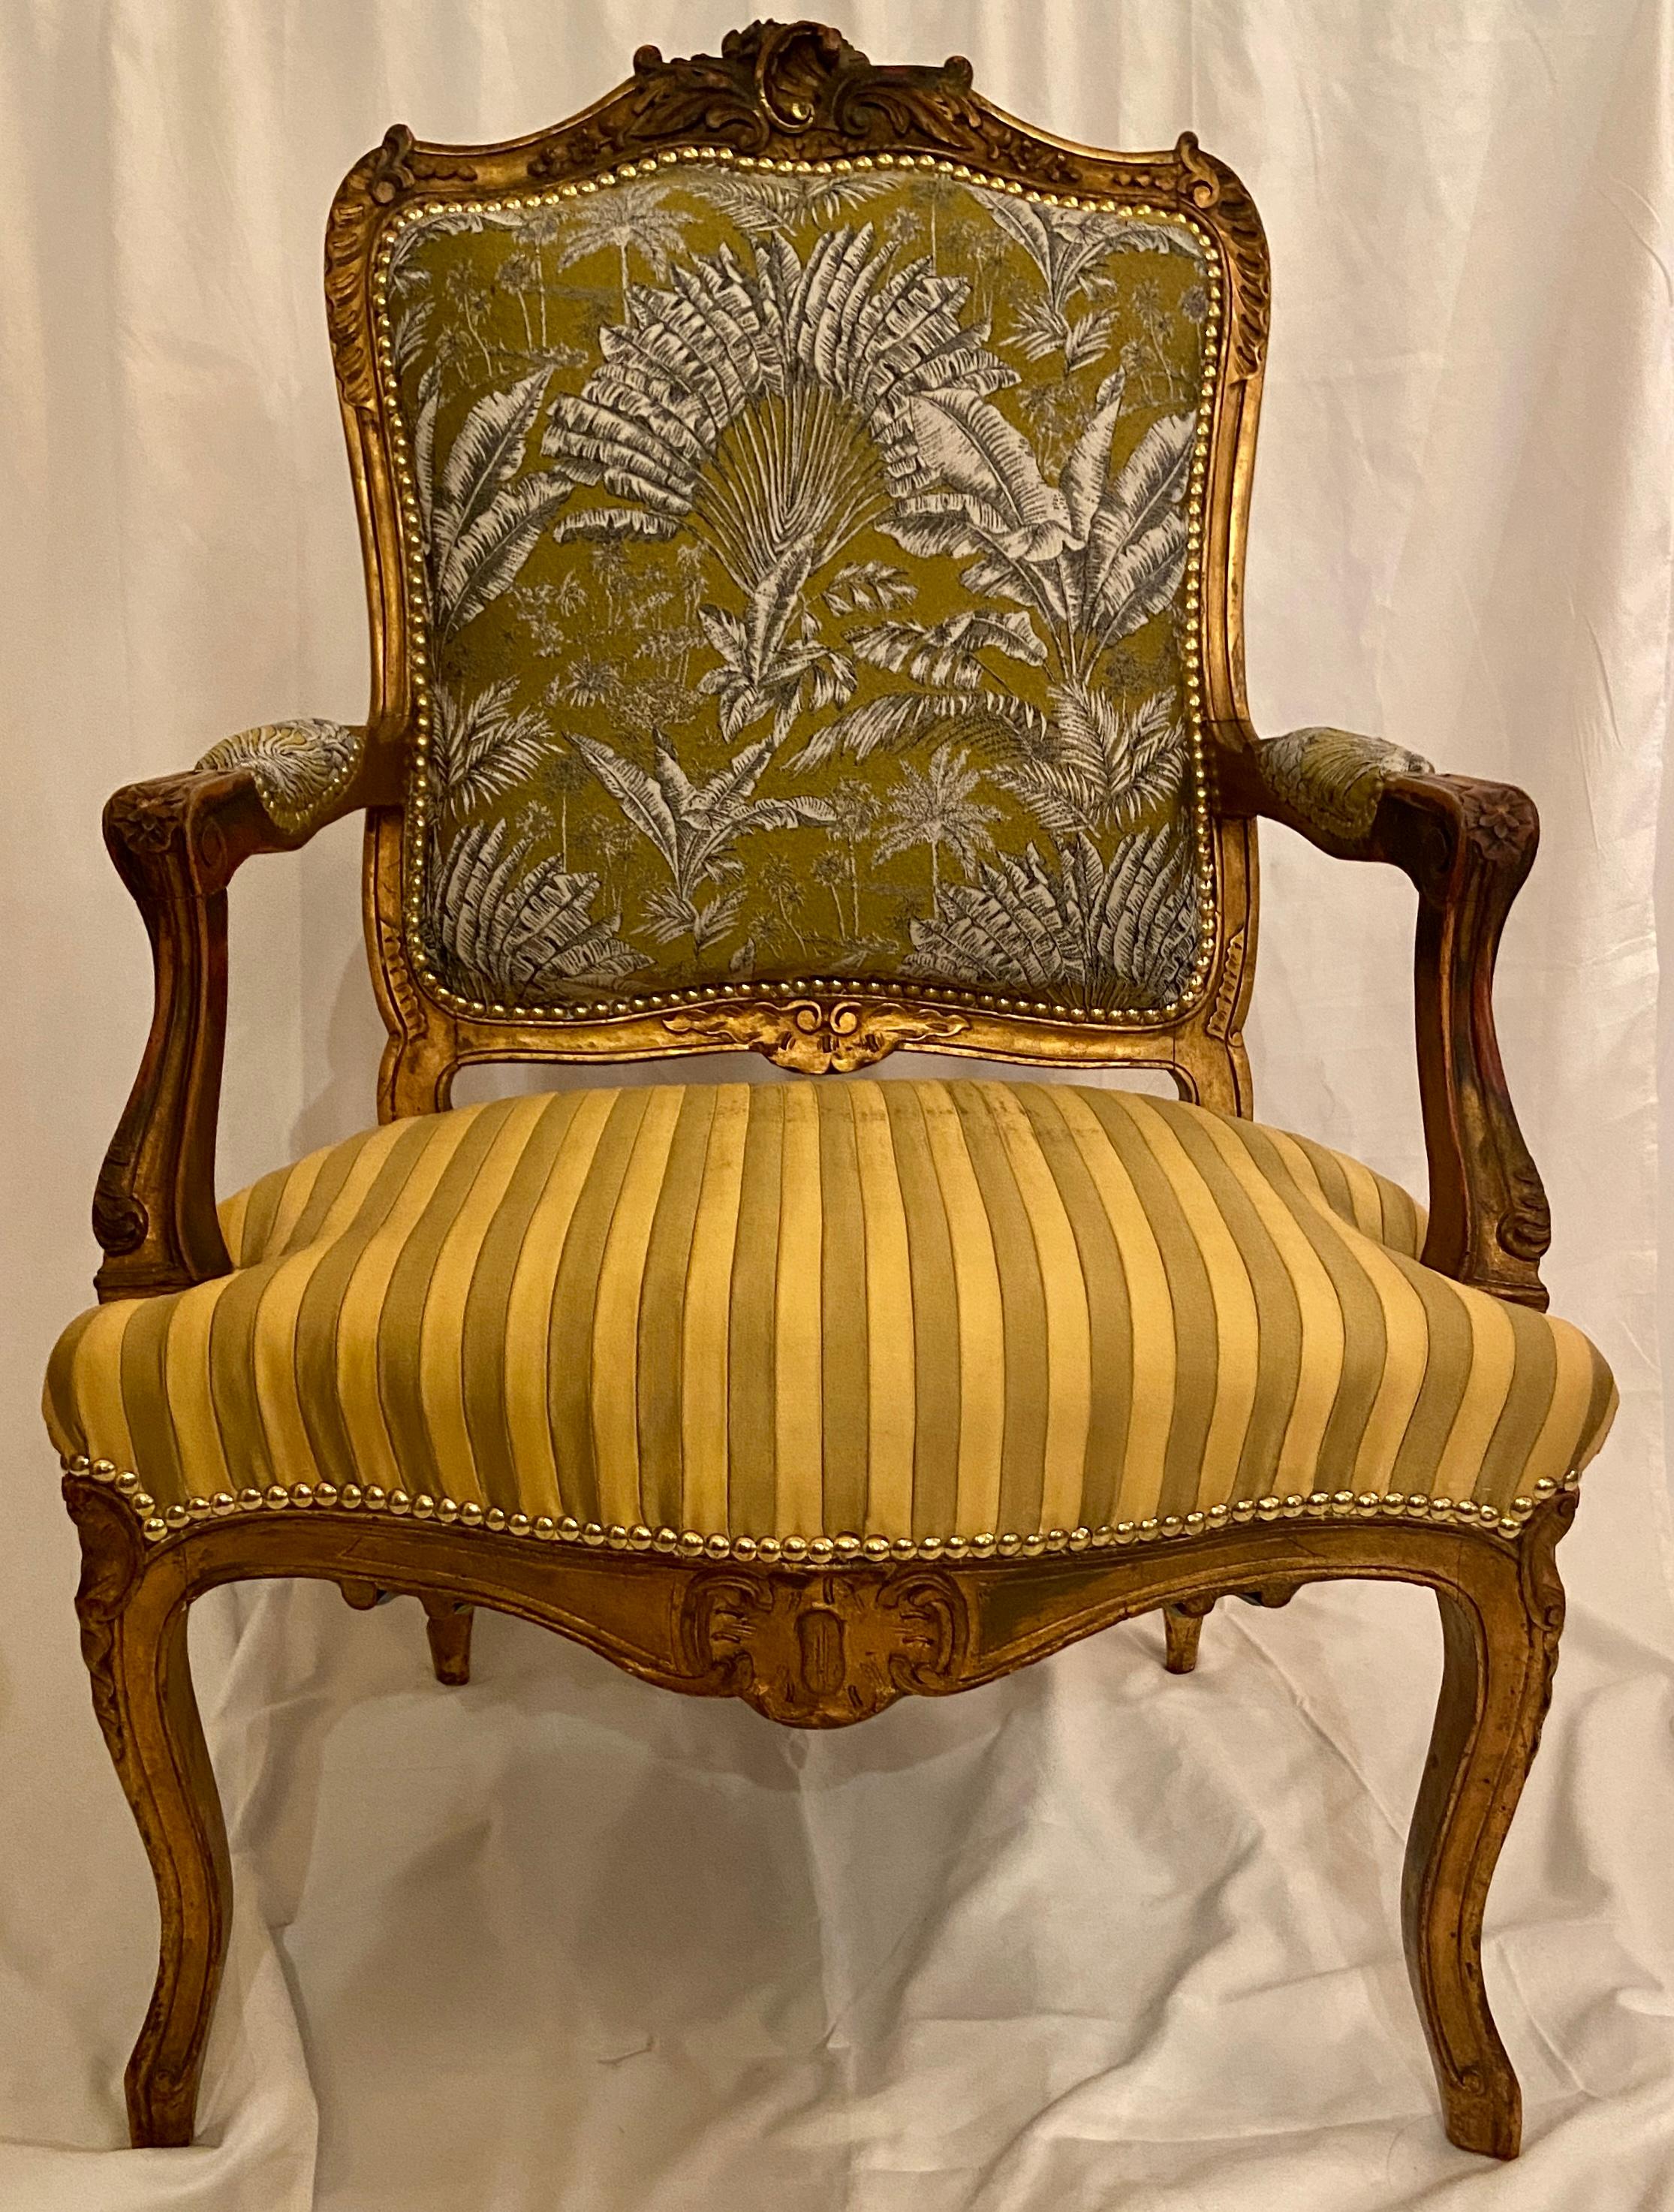 Pair Antique French carved walnut yellow & green upholstered armchairs, Circa 1860. A great pair of French armchairs. Nicely upholstered as well.